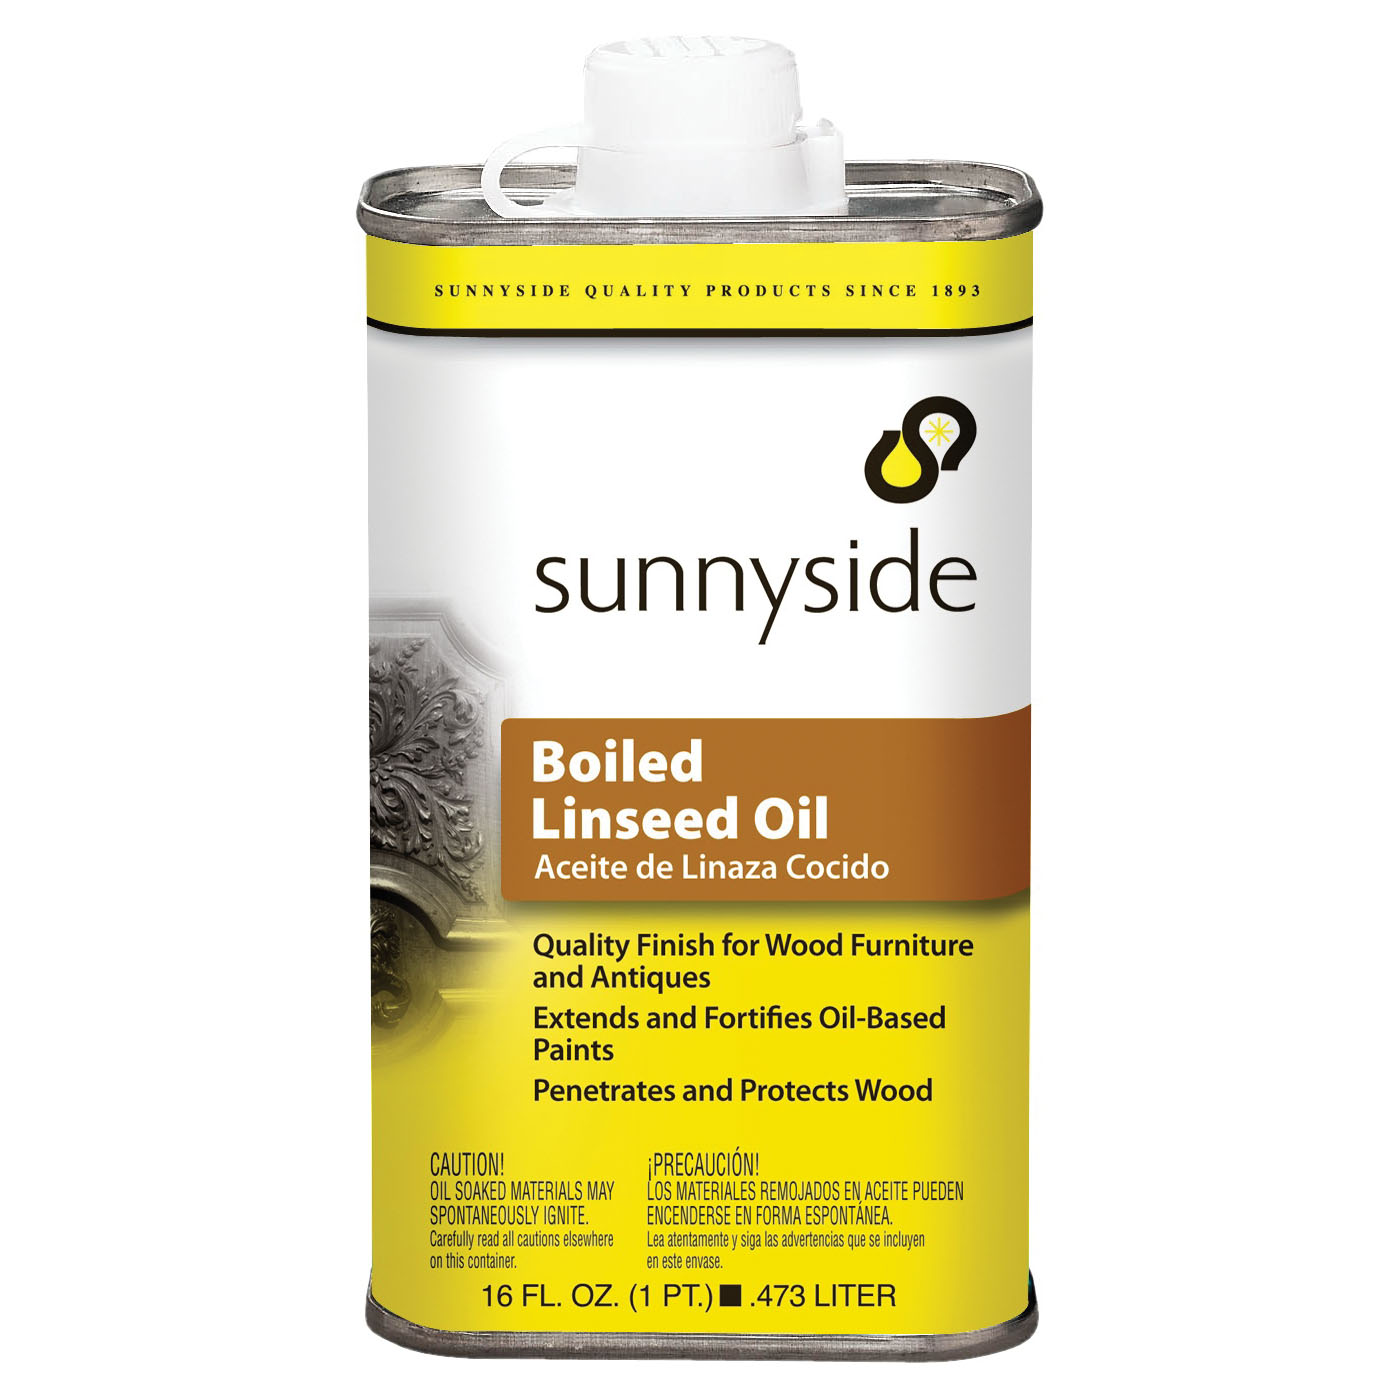 How to use linseed oil on wood projects  Linseed oil on wood, Wood oil  finish, Linseed oil